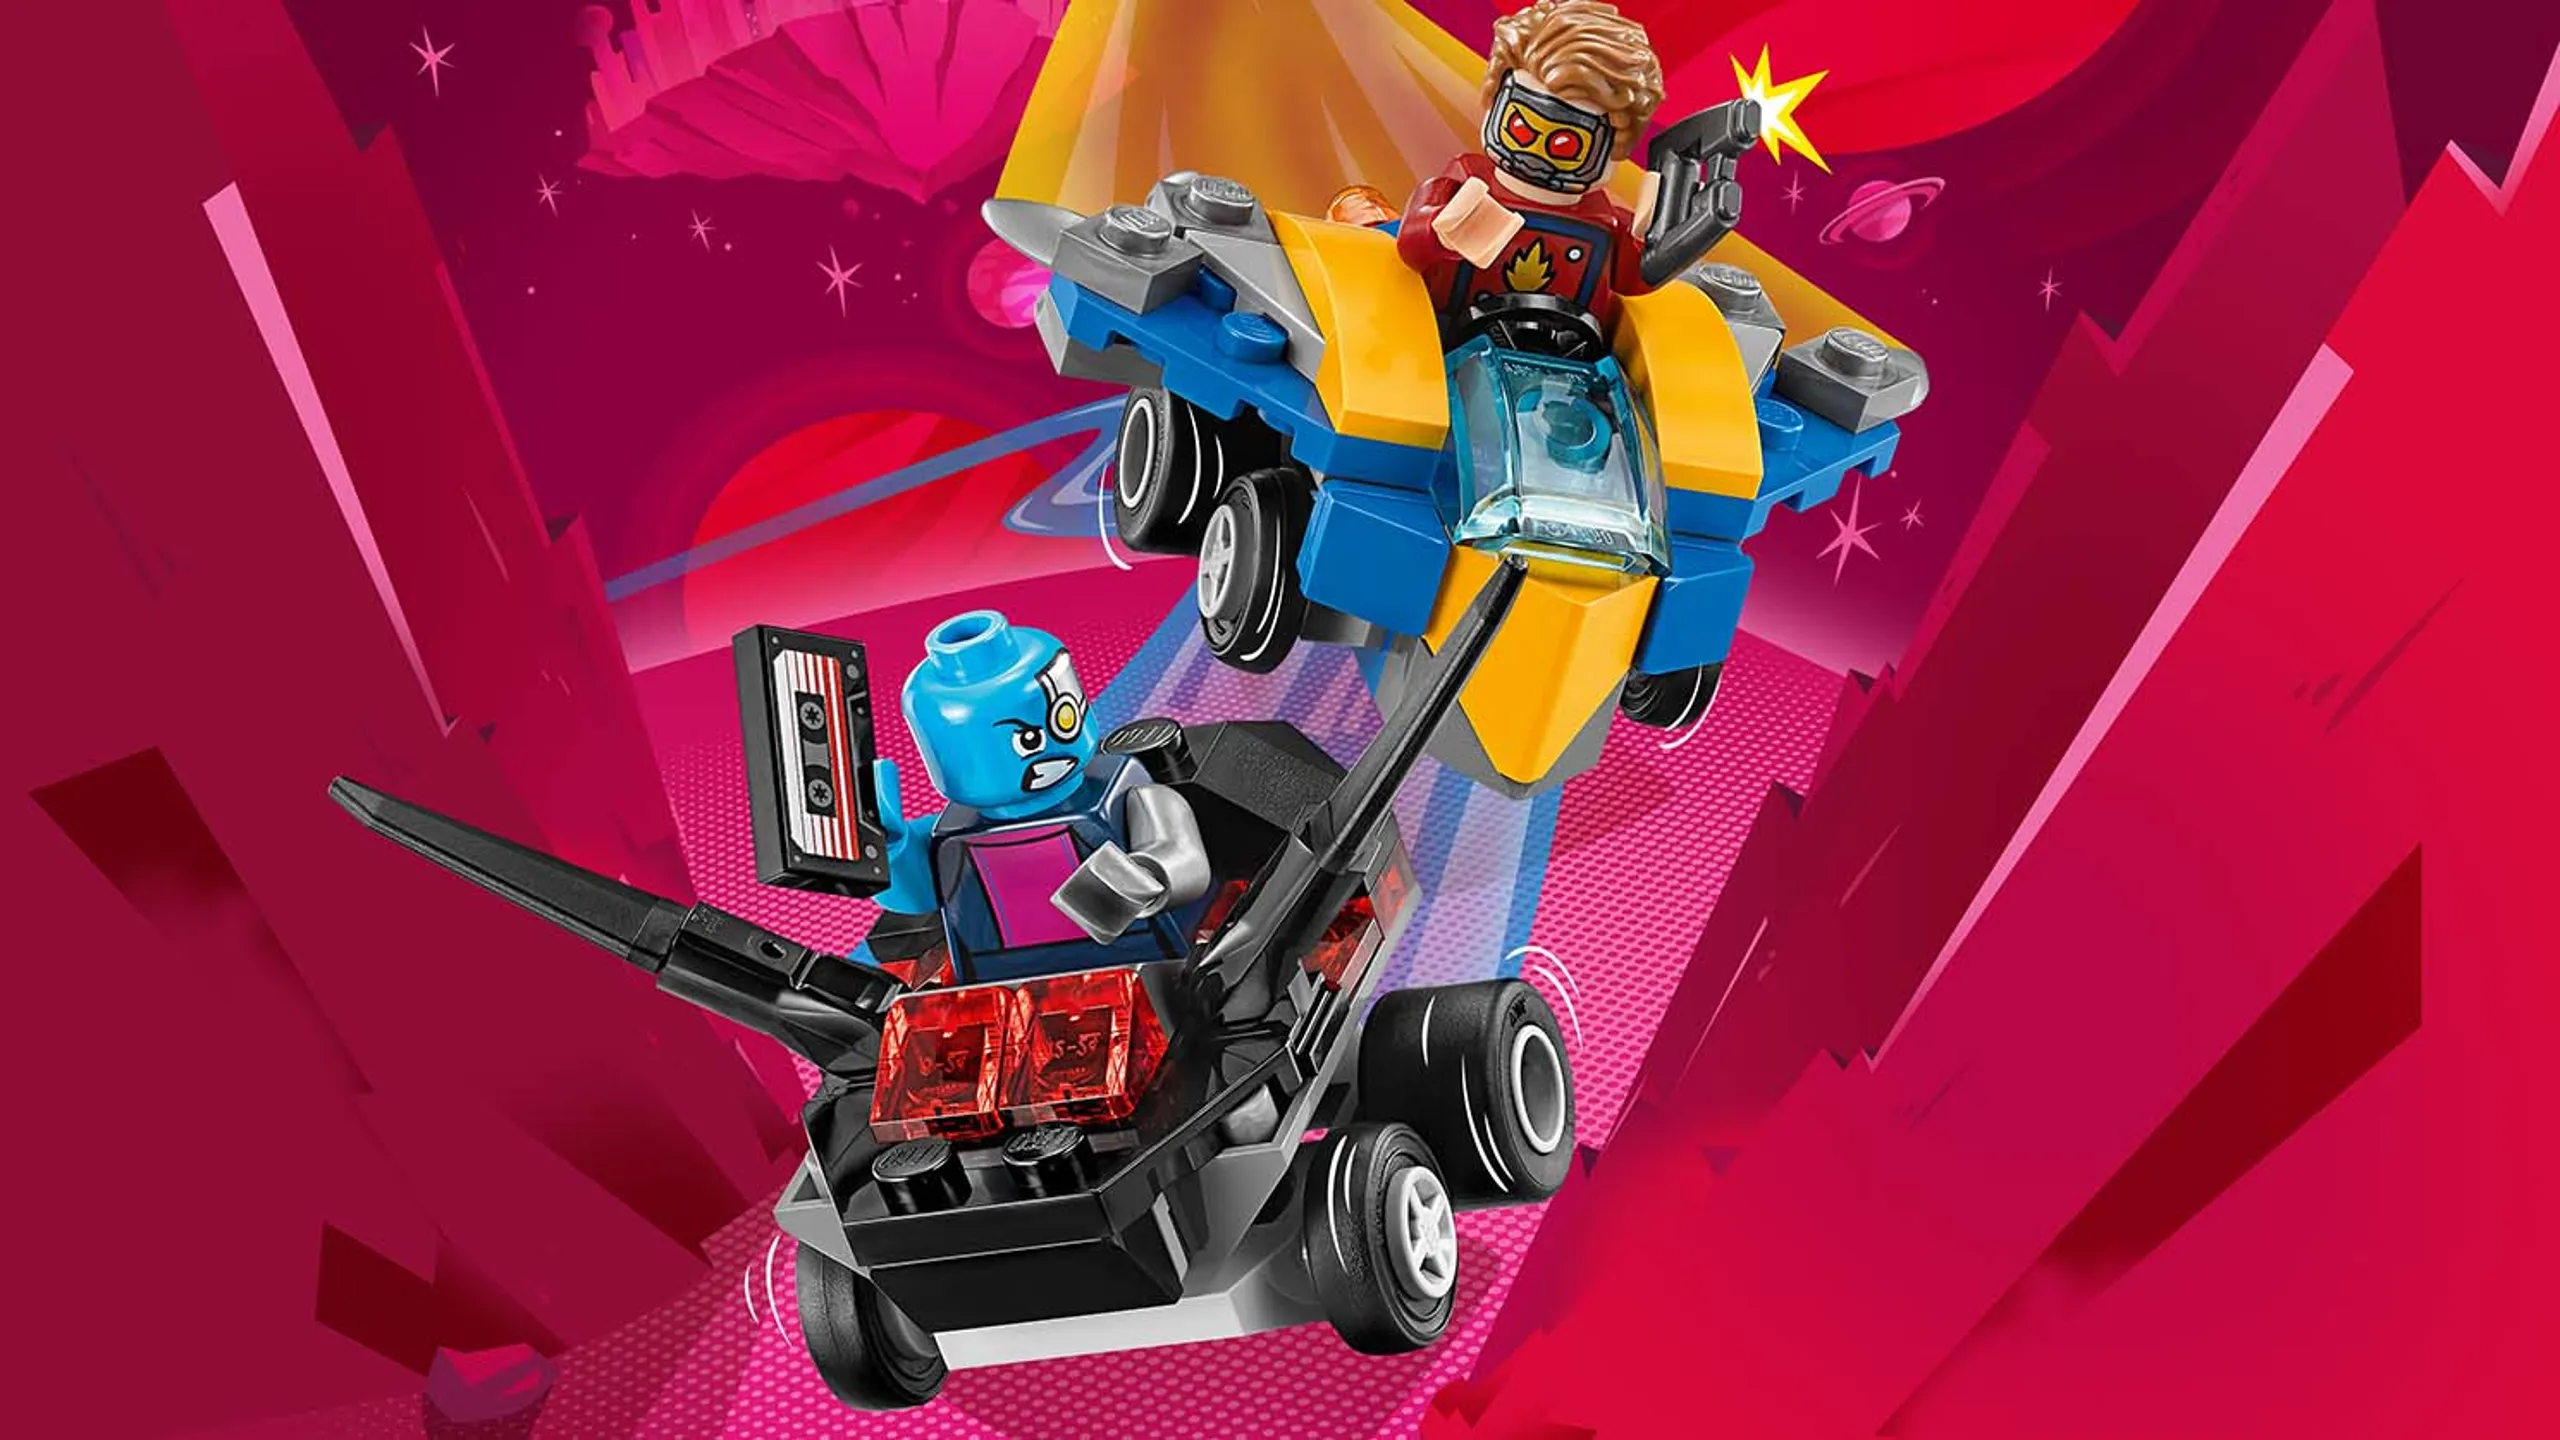 LEGO MARVEL Super Heroes Star-Lord vs Nebula - 76090 - Watch Star-Lord and Nebula battling each other in their racecars including a tape and a gun